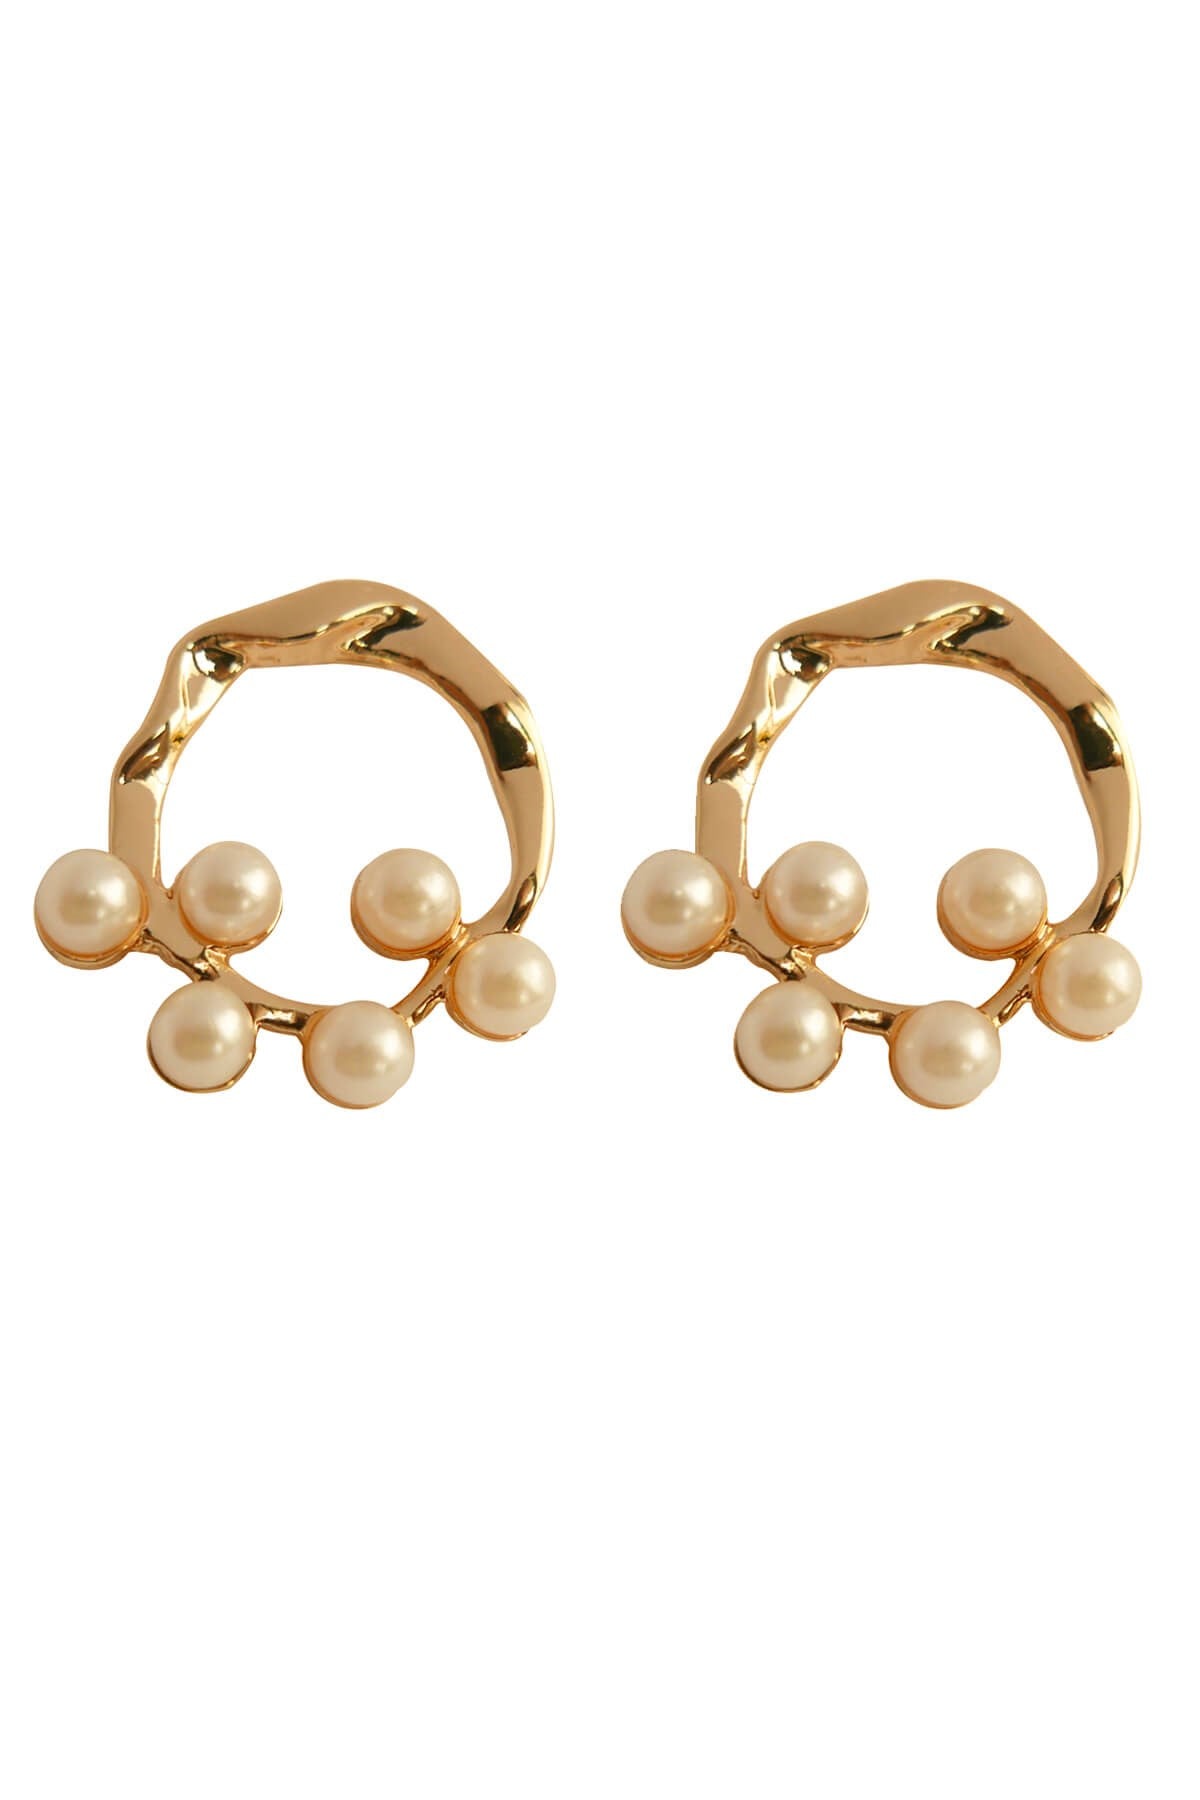 Organic Shaped Pearl Earrings Gold Plated